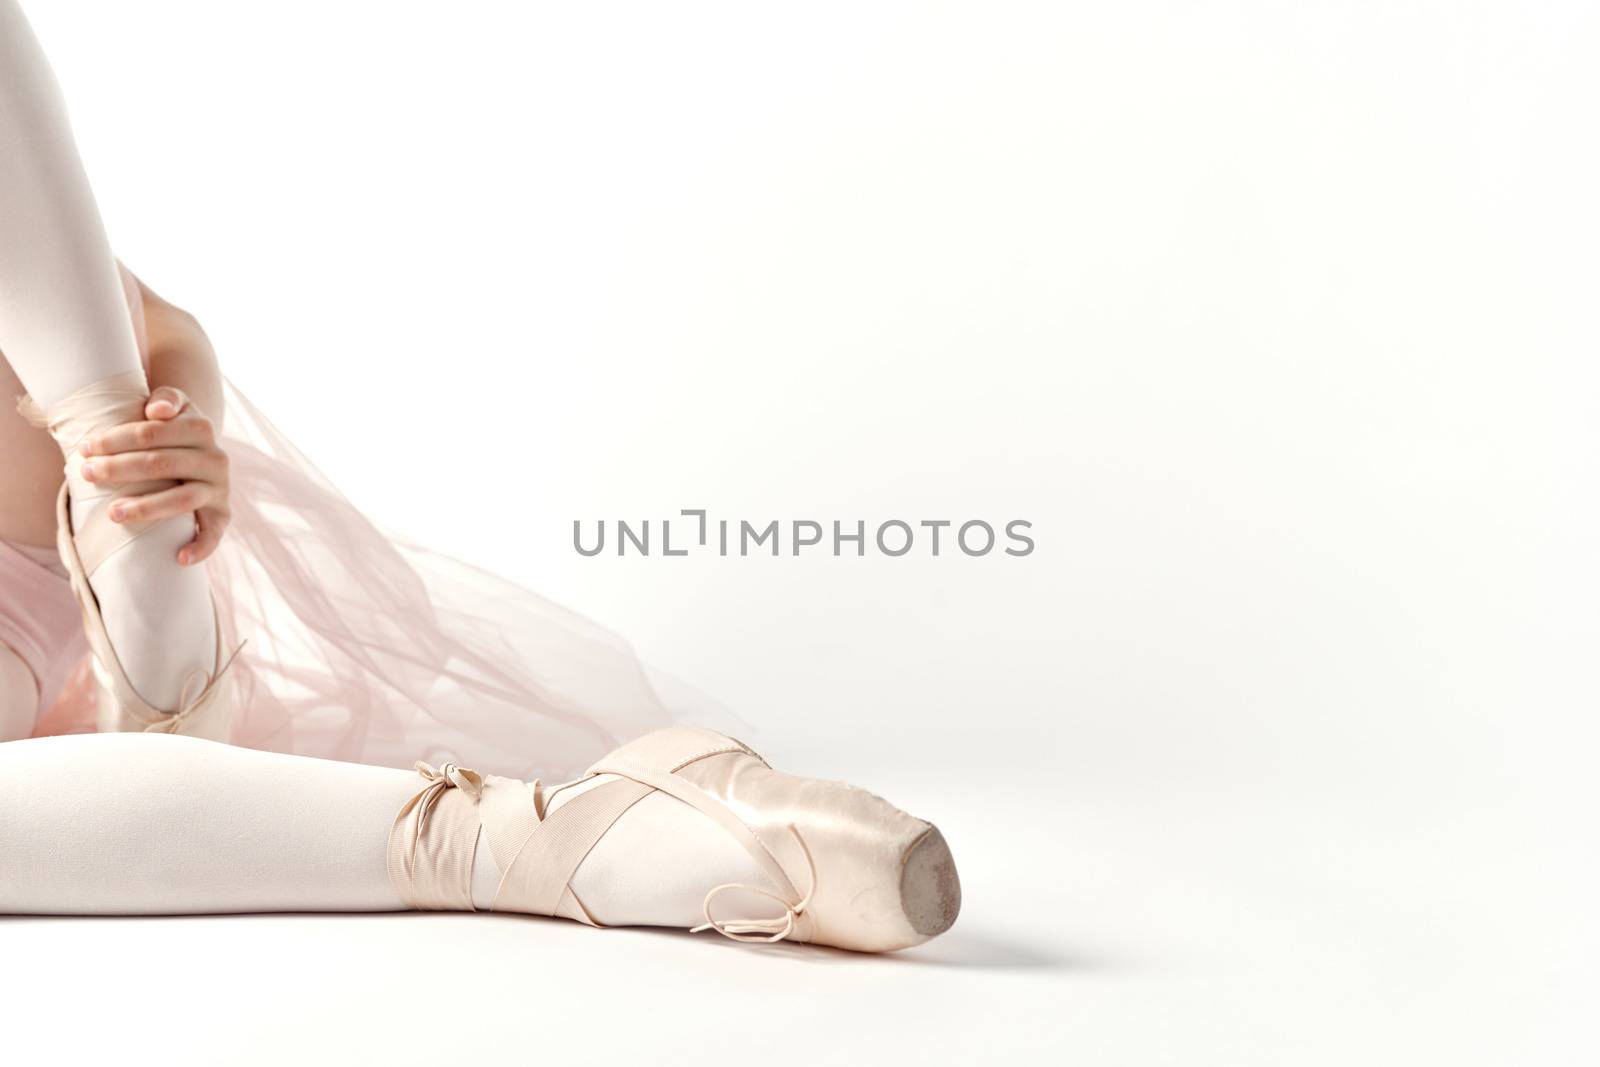 Pointe shoes ballet feet close-up light background cropped view by SHOTPRIME